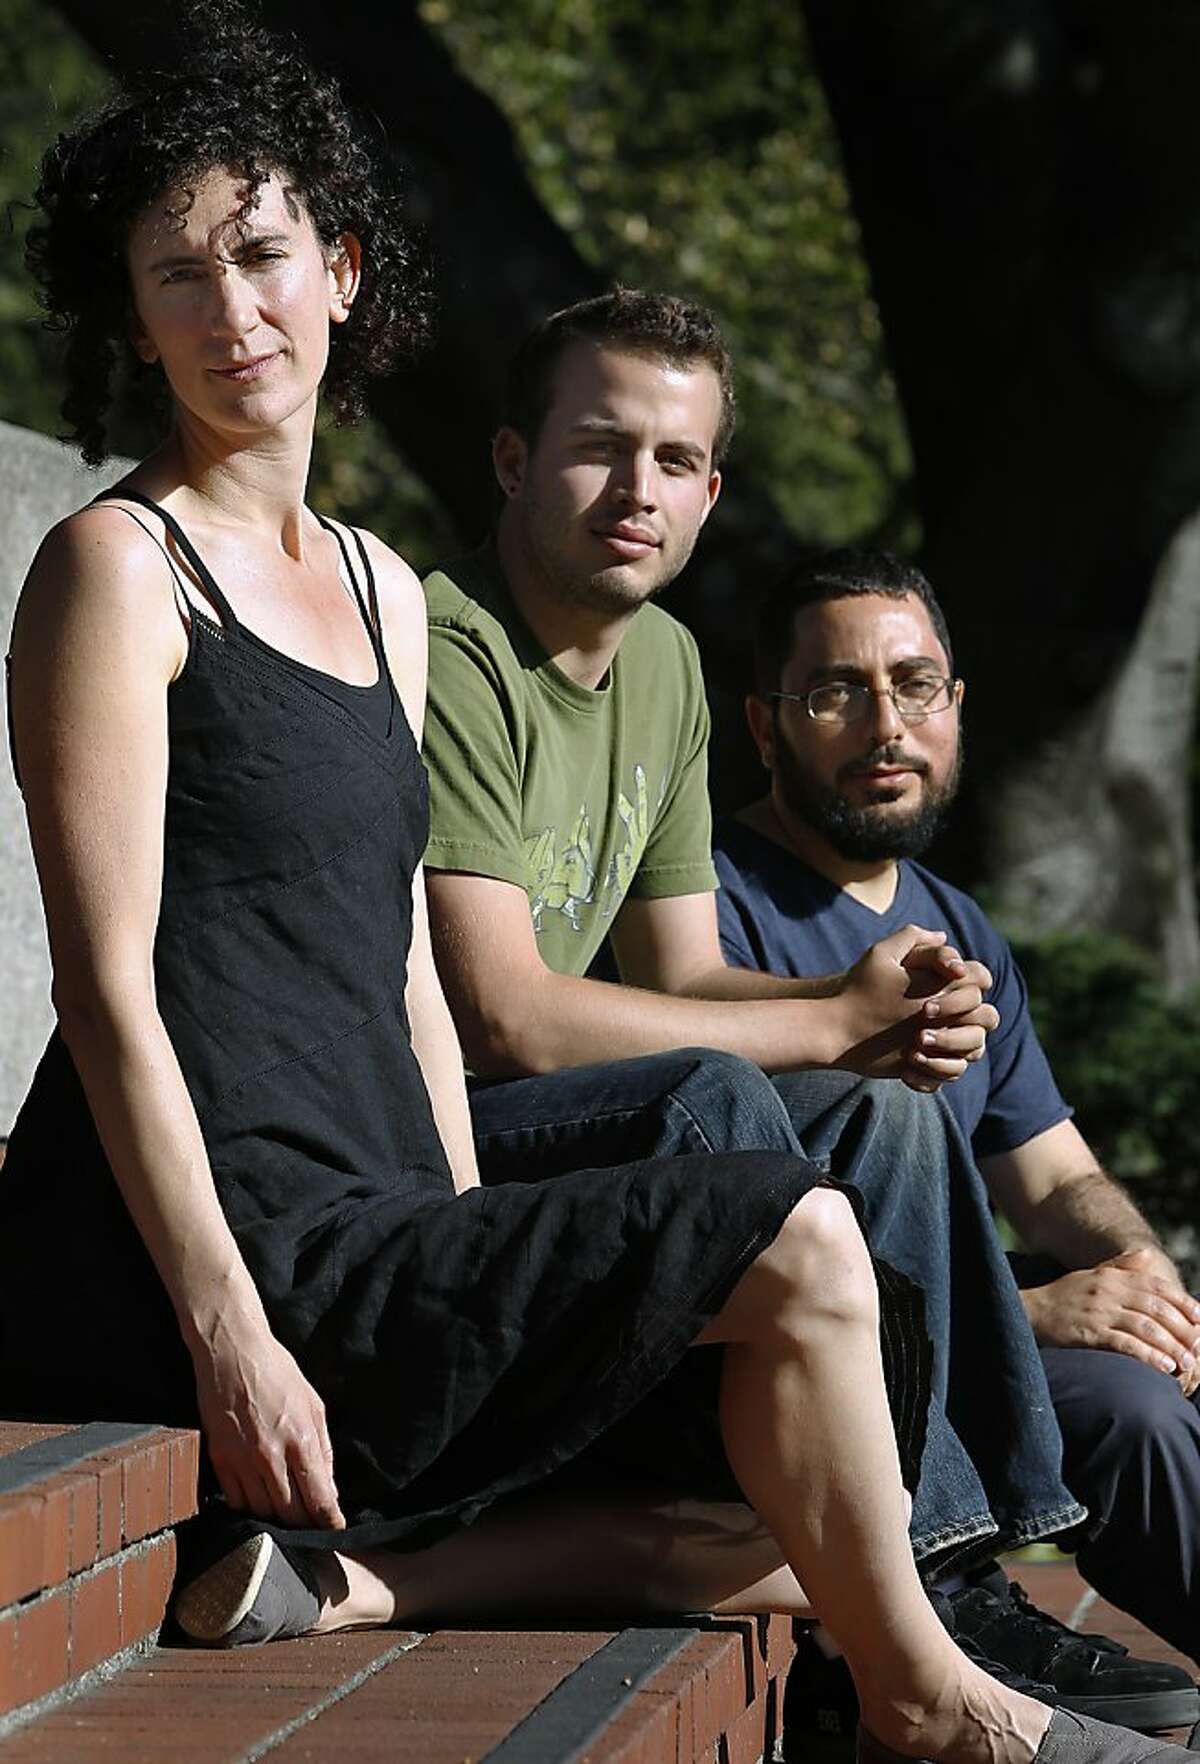 Liz Jackson (left), Roi Bachmutsky (center) and Tom Pessah are seen in Berkeley, Calif. on Saturday, July 28, 2012. Bachmutsky, an undergraduate at UC Berkeley, and Pessah, a graduate student, support the petition drive against the recommendations of the report. Jackson is a former UC Berkeley student who is in the National Lawyers' Guild and helped write a letter complaining about the report.